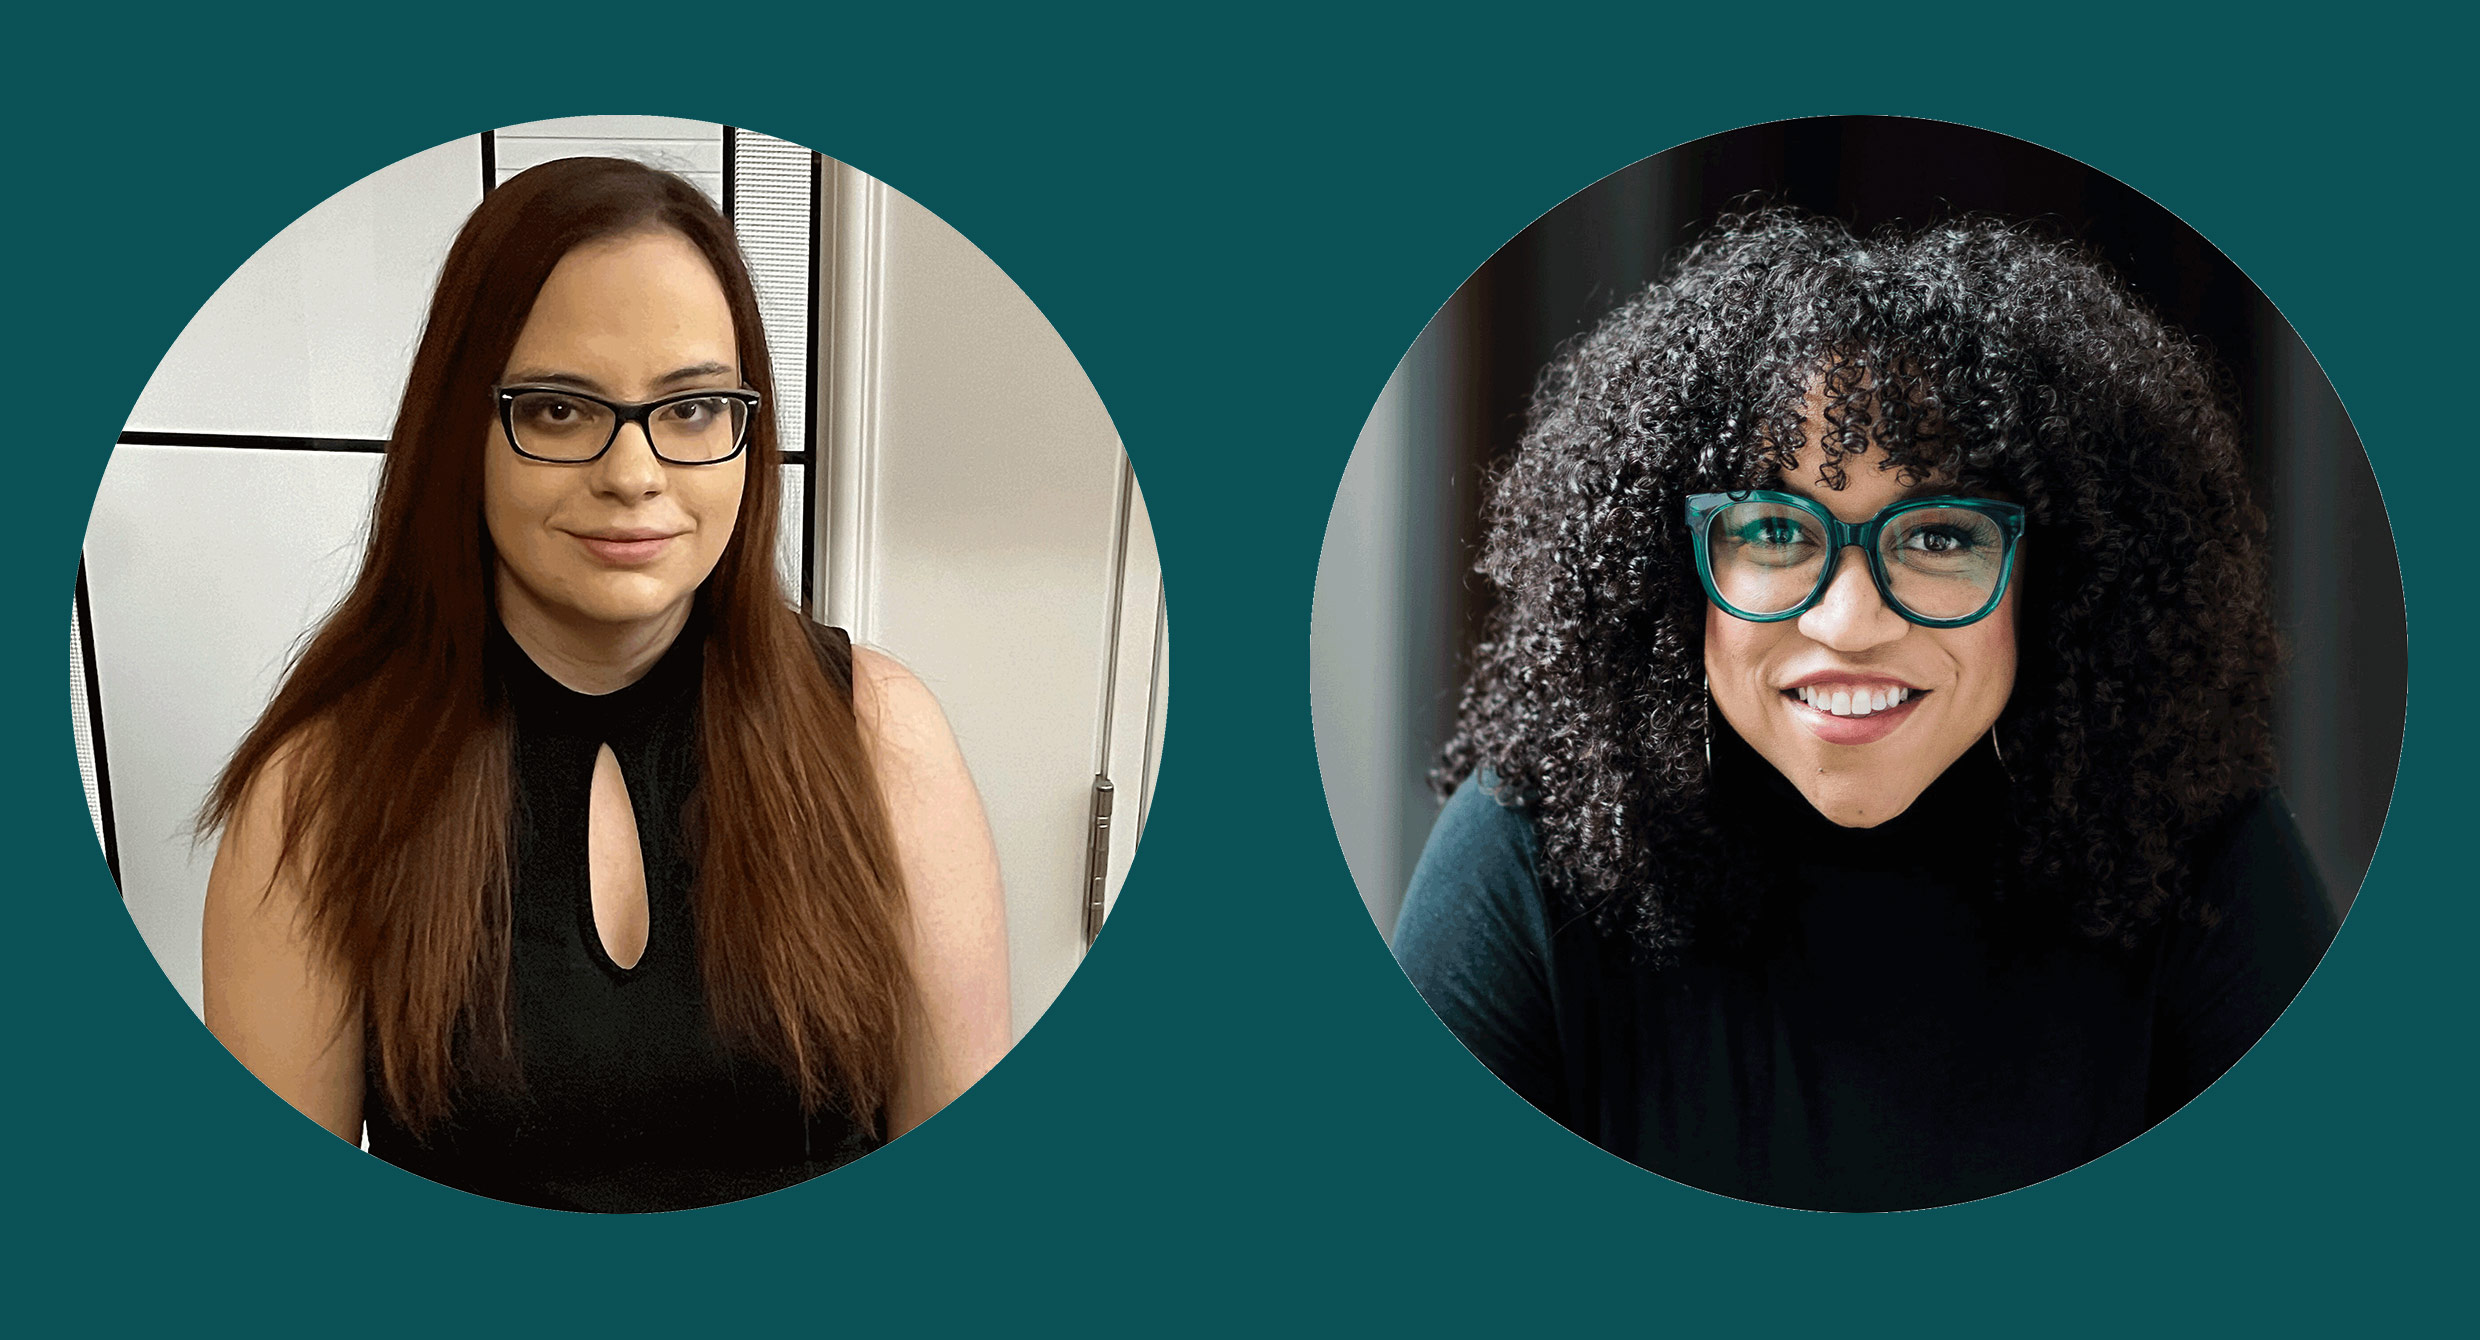 Two circular head shots placed side-by-side on deep forest green patterned background. Left: Young person with long dark-reddish hair and dark glasses looks at the camera with a smile. They wear a black sleeveless top with a teardrop shape in the front and stand in front of a pale grey door. Right: Woman with dark curly hair has a bright smile and looks engaged. She wears deep forest green eyeglasses, a dark turtleneck sweater, and metal earrings hang from her ears. 